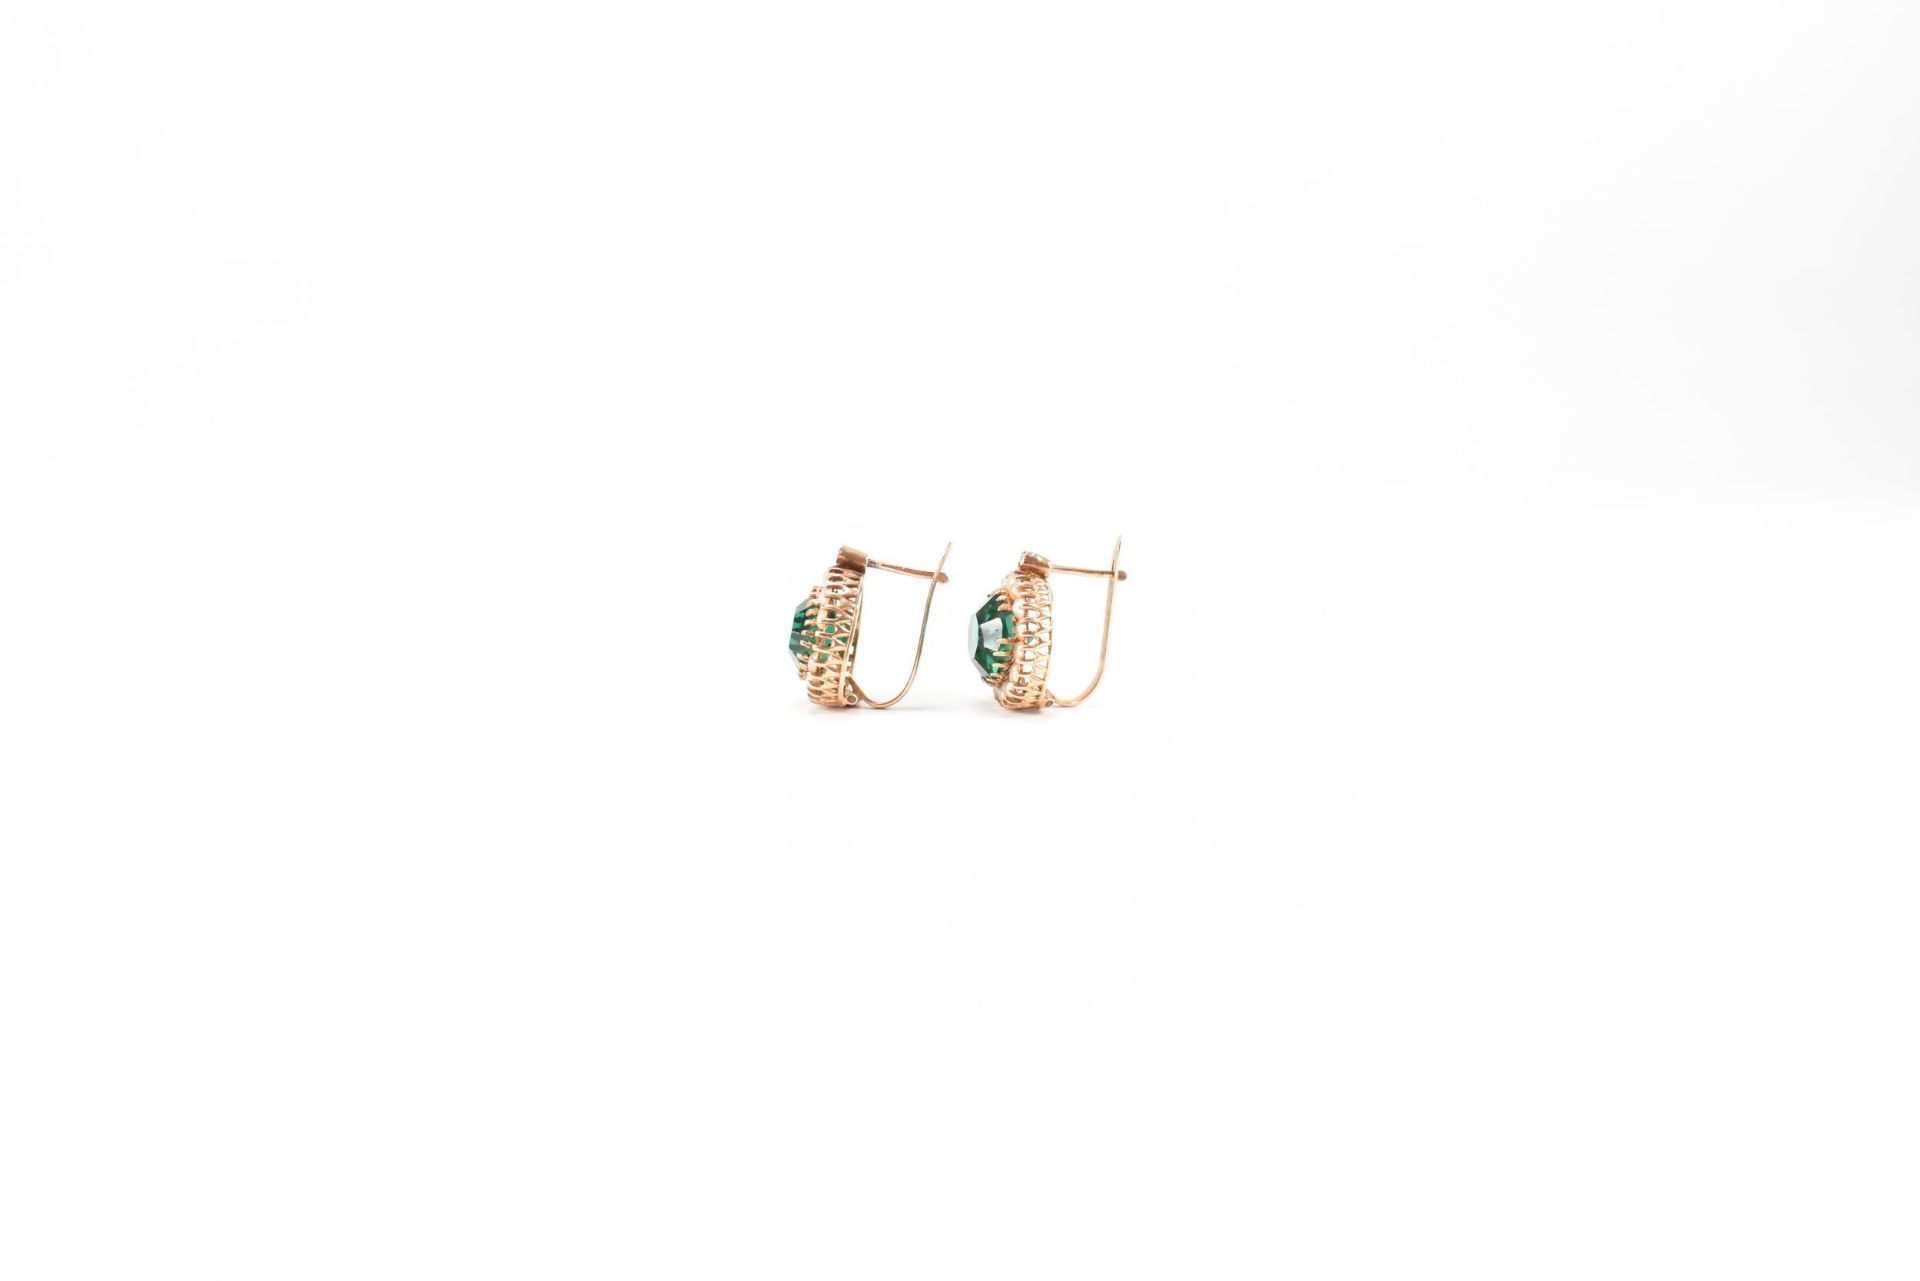 PAIR OF 14CT GOLD GREEN PASTE & PEARL EARRINGS - Image 2 of 4